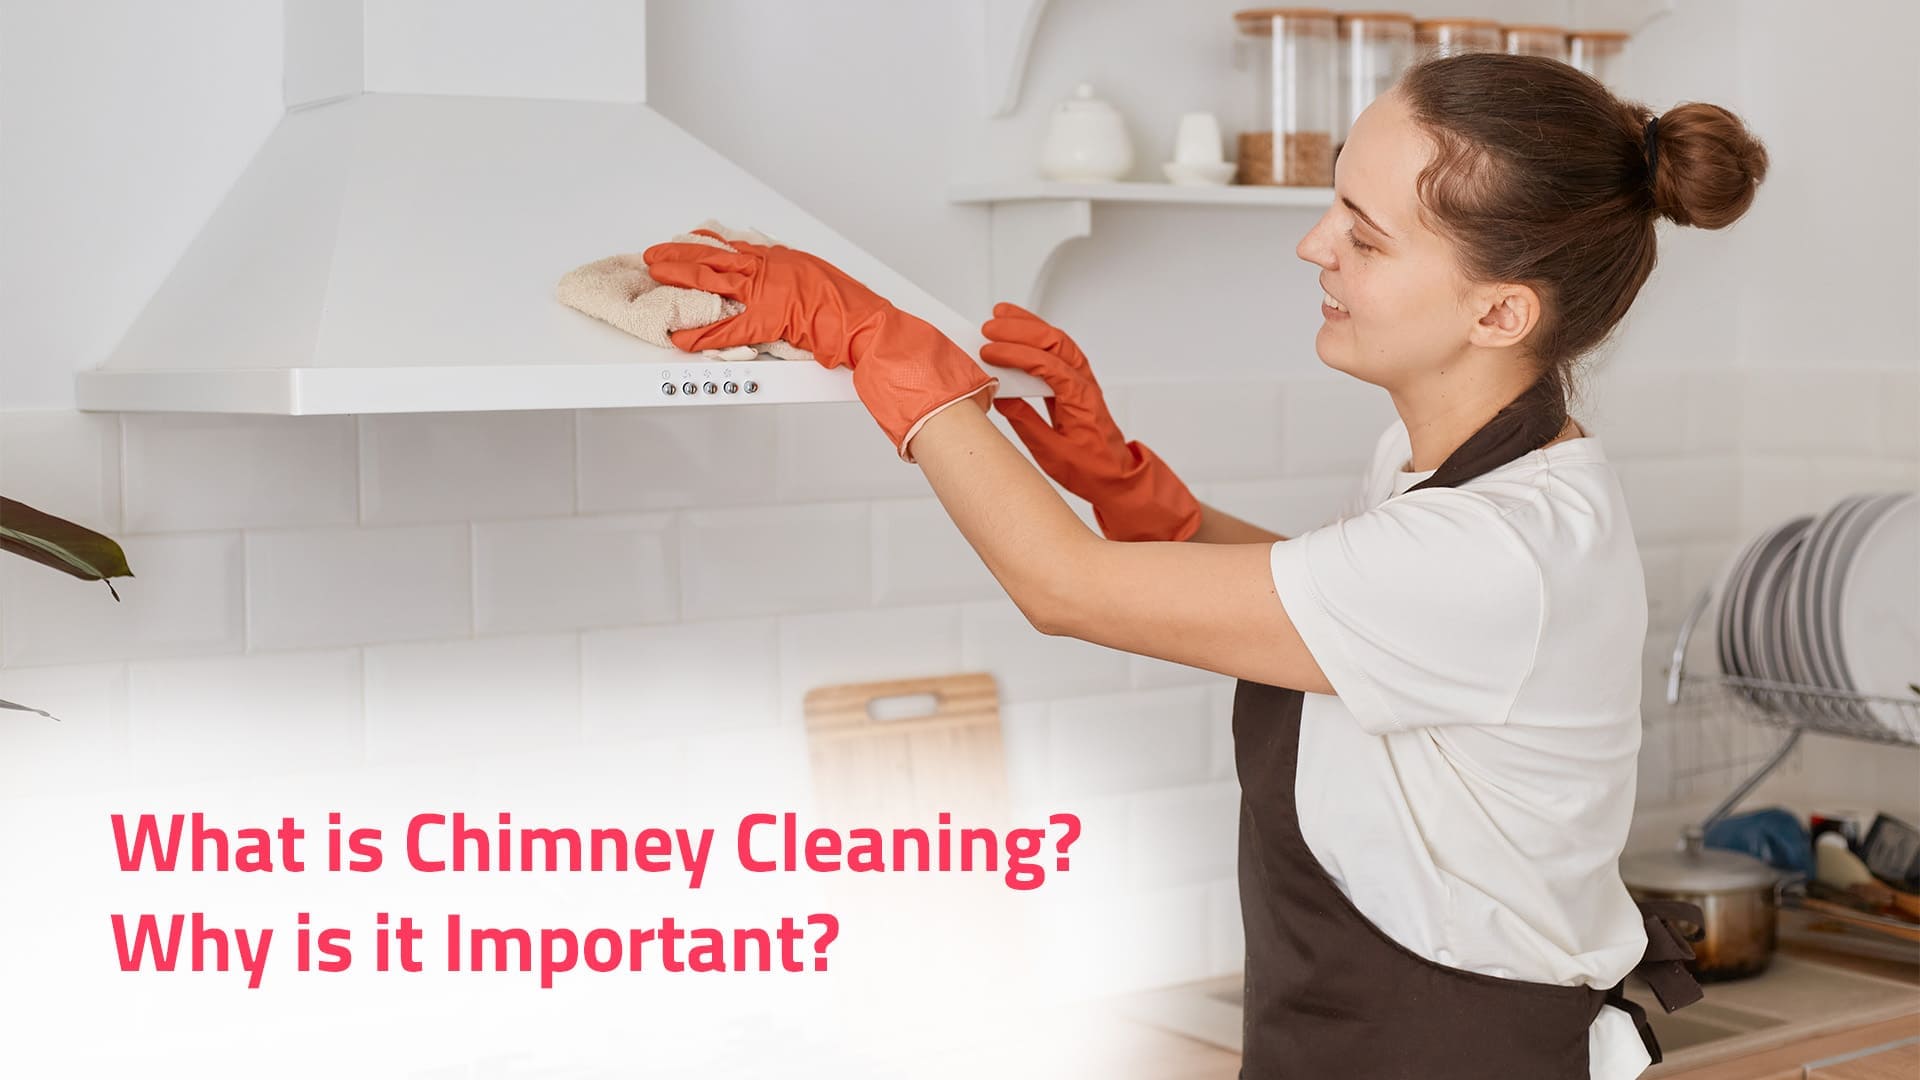 cleaning services in bangalore